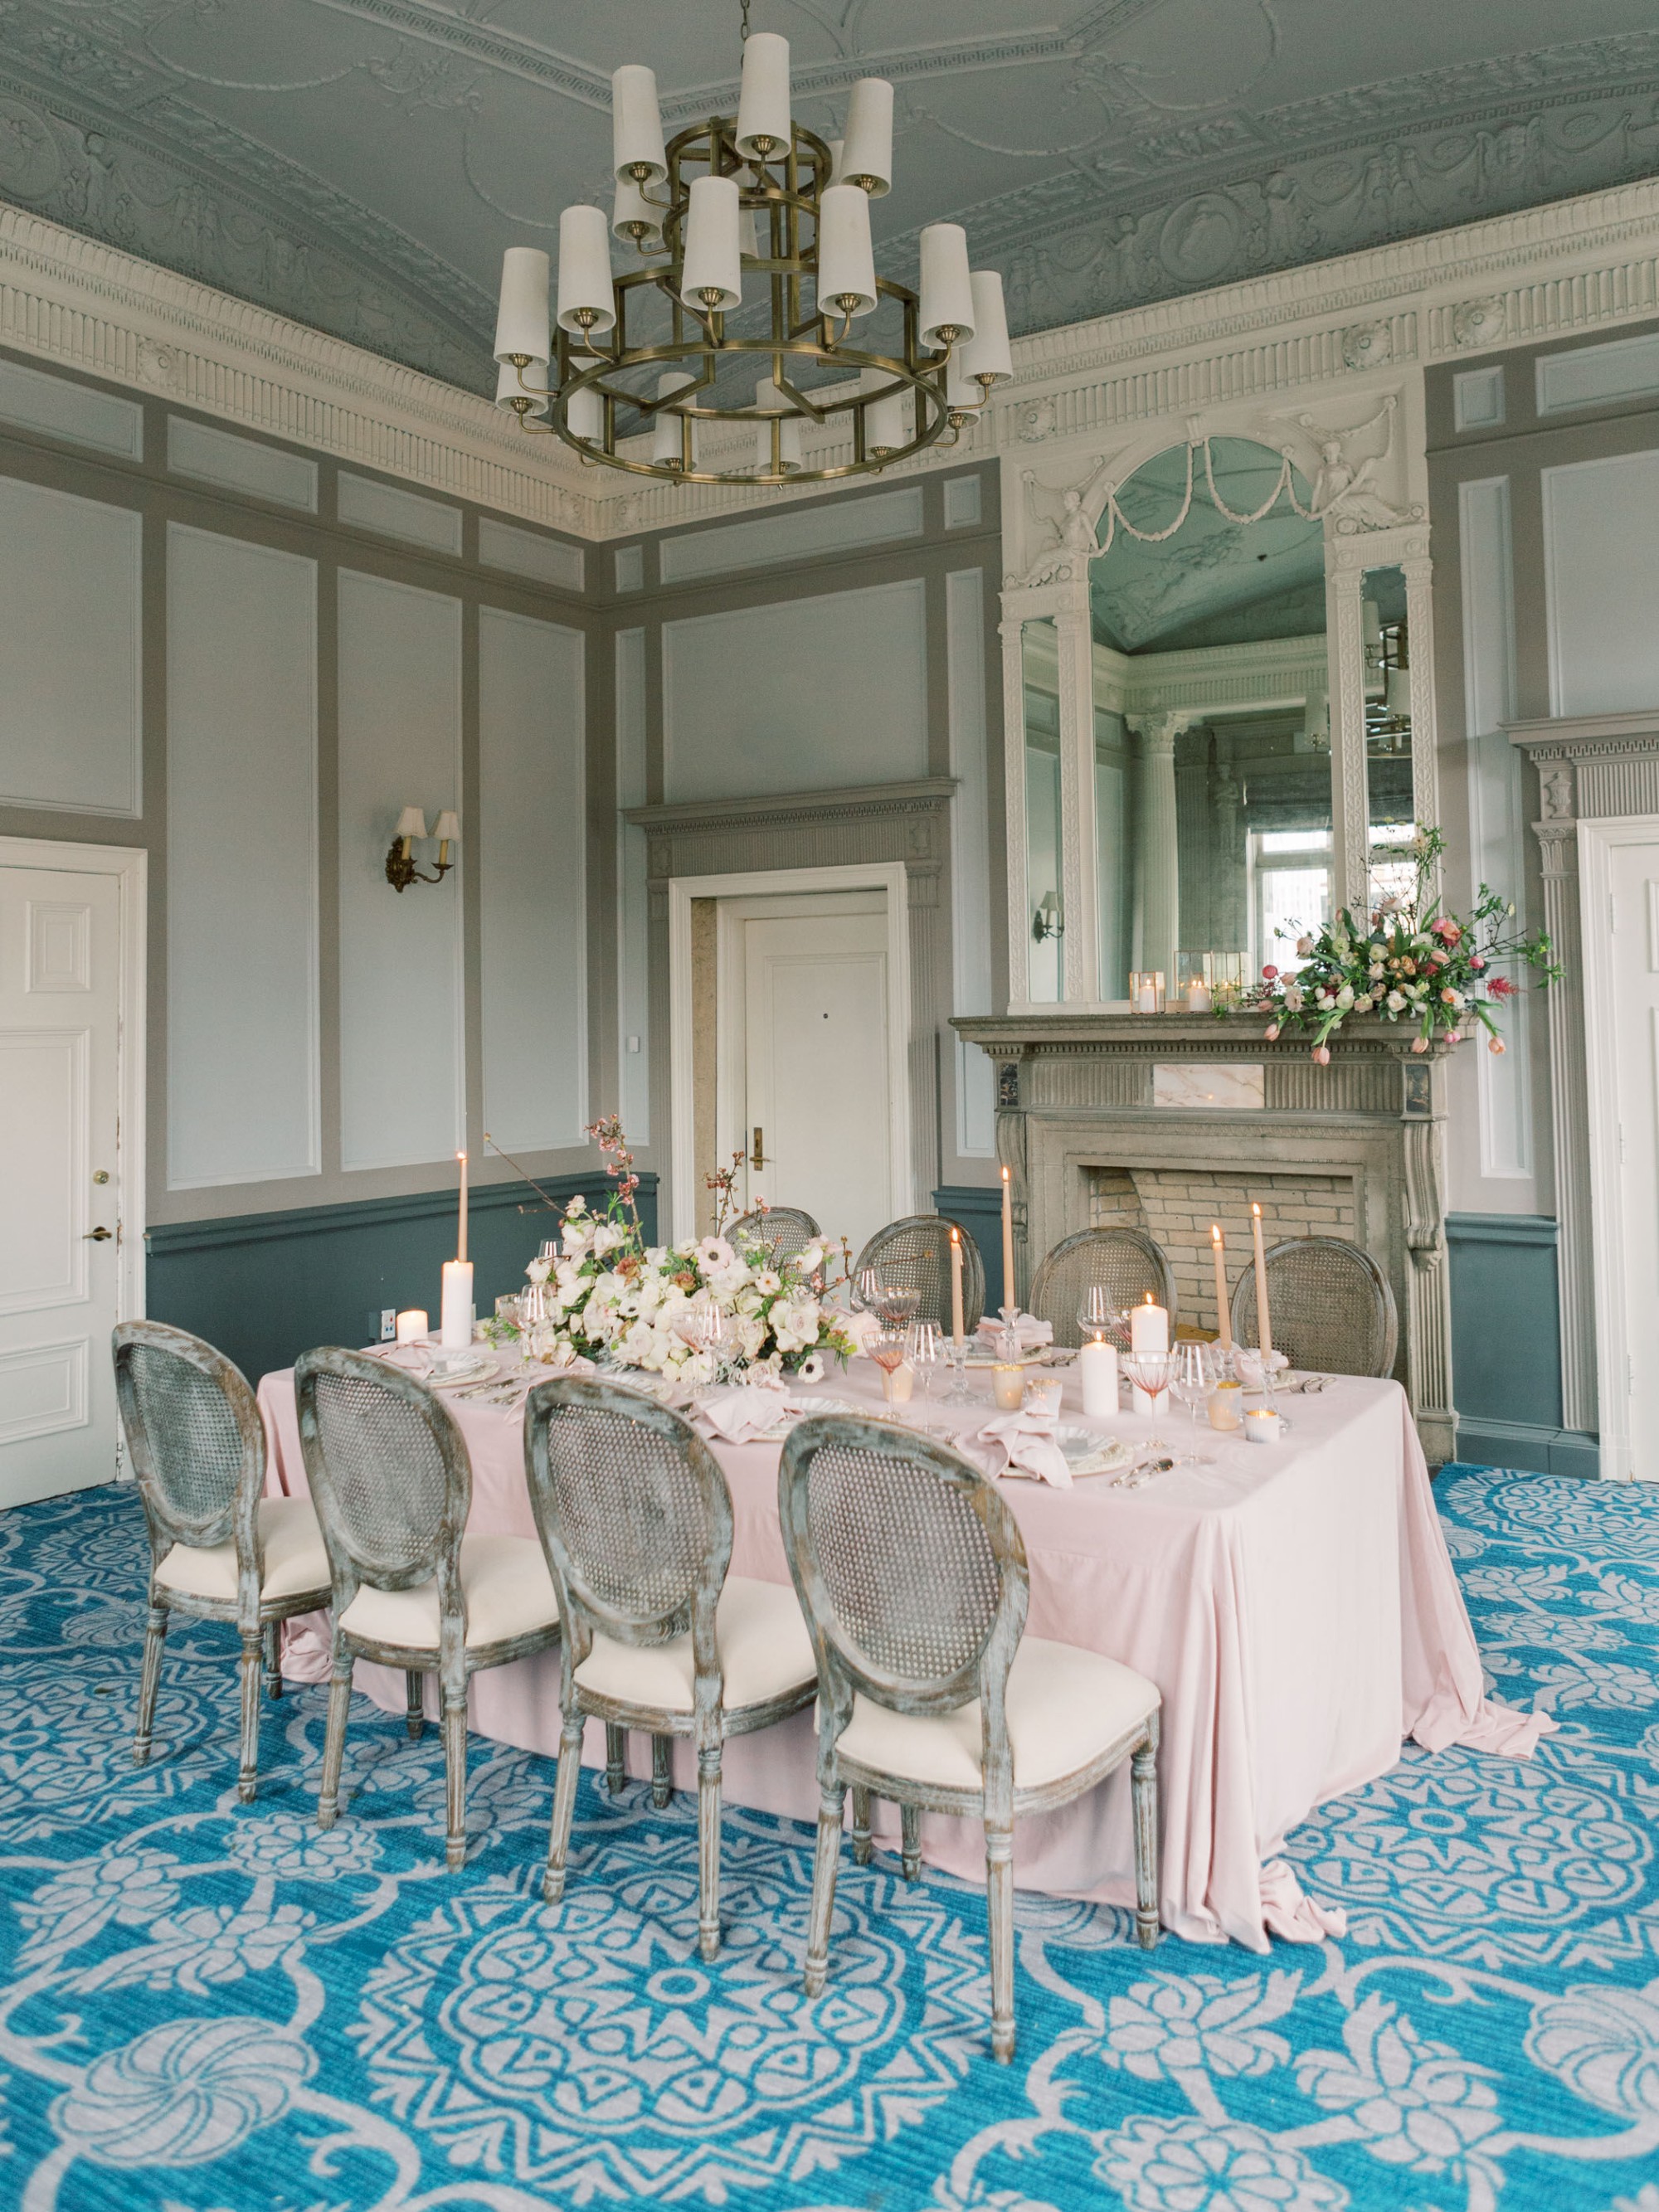 An elegant dining room with a pink tablecloth, floral centerpiece, ornate fireplace, large mirror, and chandelier, with blue patterned carpet.